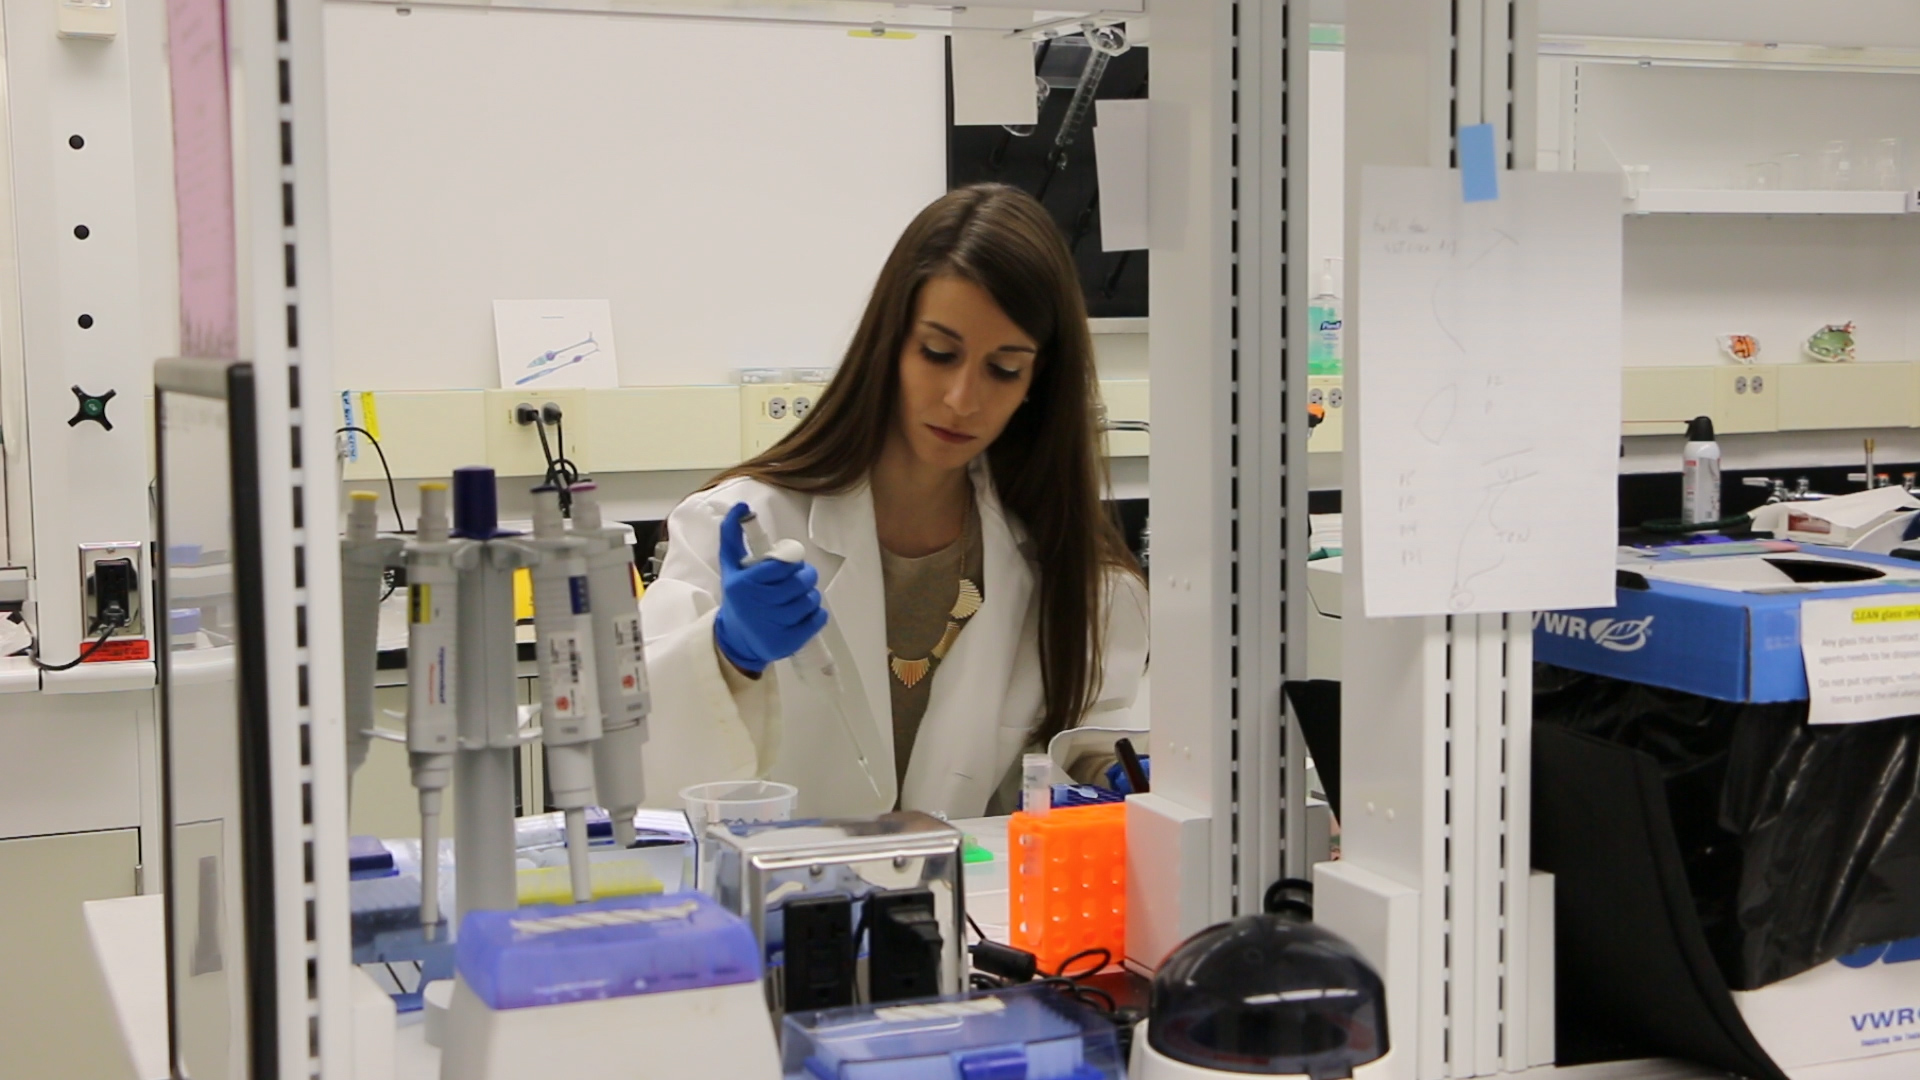 Naomi Charalambakis is conducting research on how the visual system works. She is also the director and co-founder of the Science and Policy Outreach Group, a student organization that works to inform the community about the importance of research.